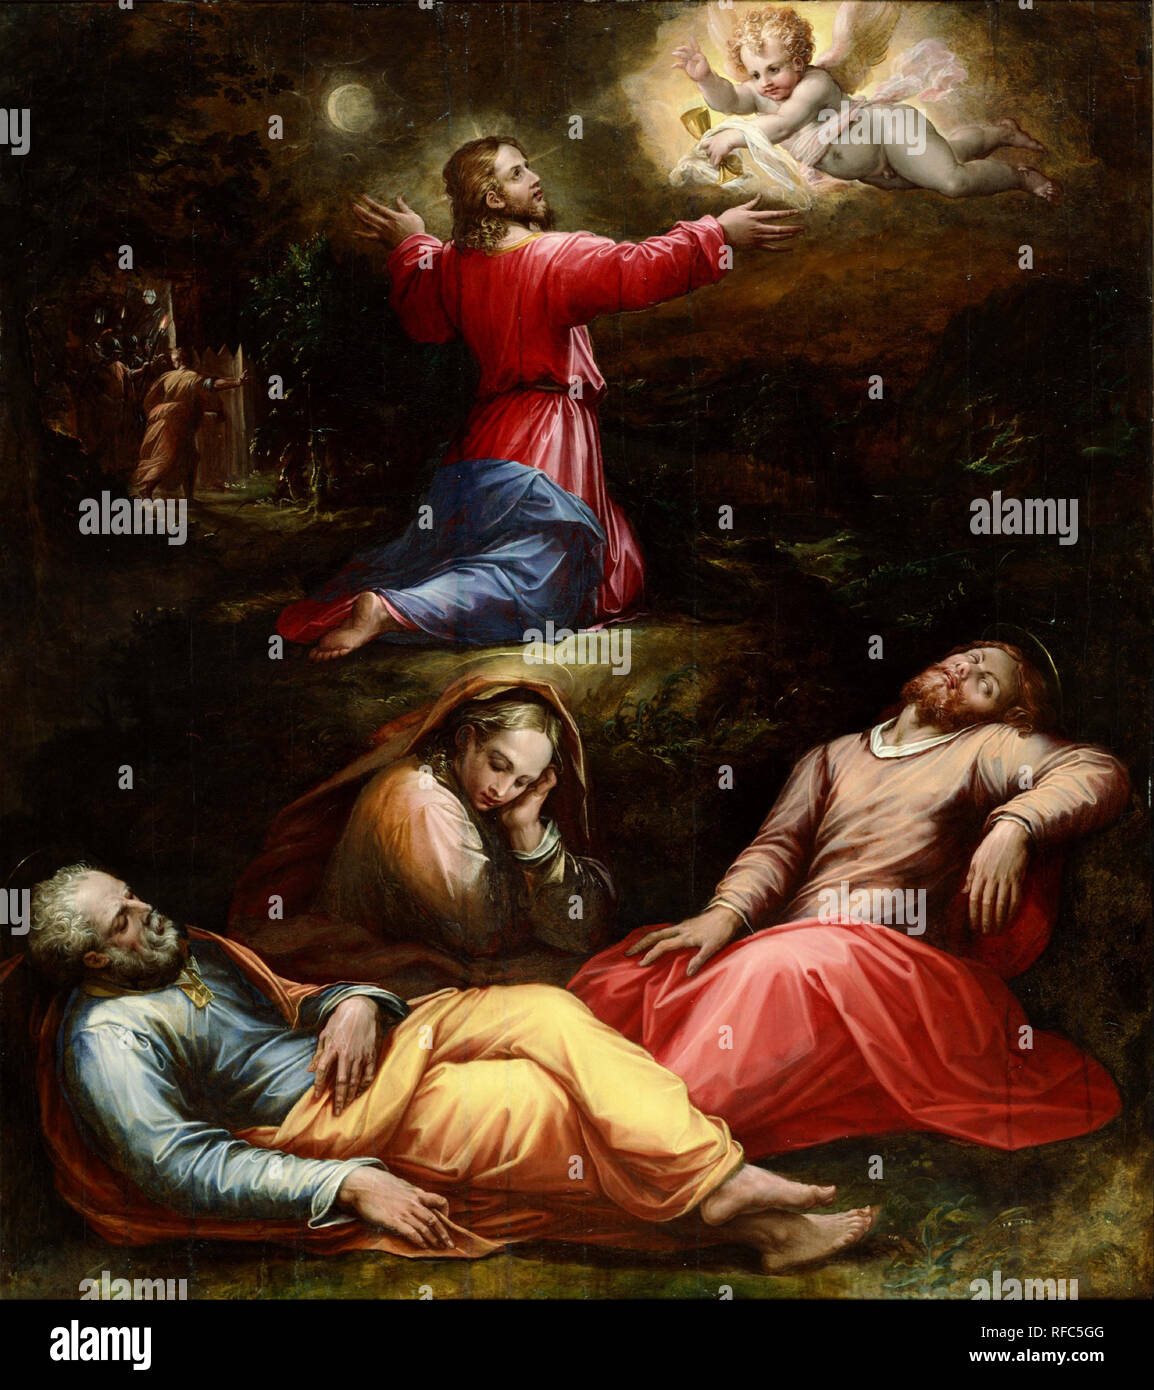 The Garden of Gethsemane. Date/Period: Ca. 1570 (?). Painting. Oil on panel oil on panel. Height: 1,435 mm (56.49 in); Width: 1,270 mm (50 in). Author: Giorgio Vasari. VASARI, GIORGIO. Stock Photo